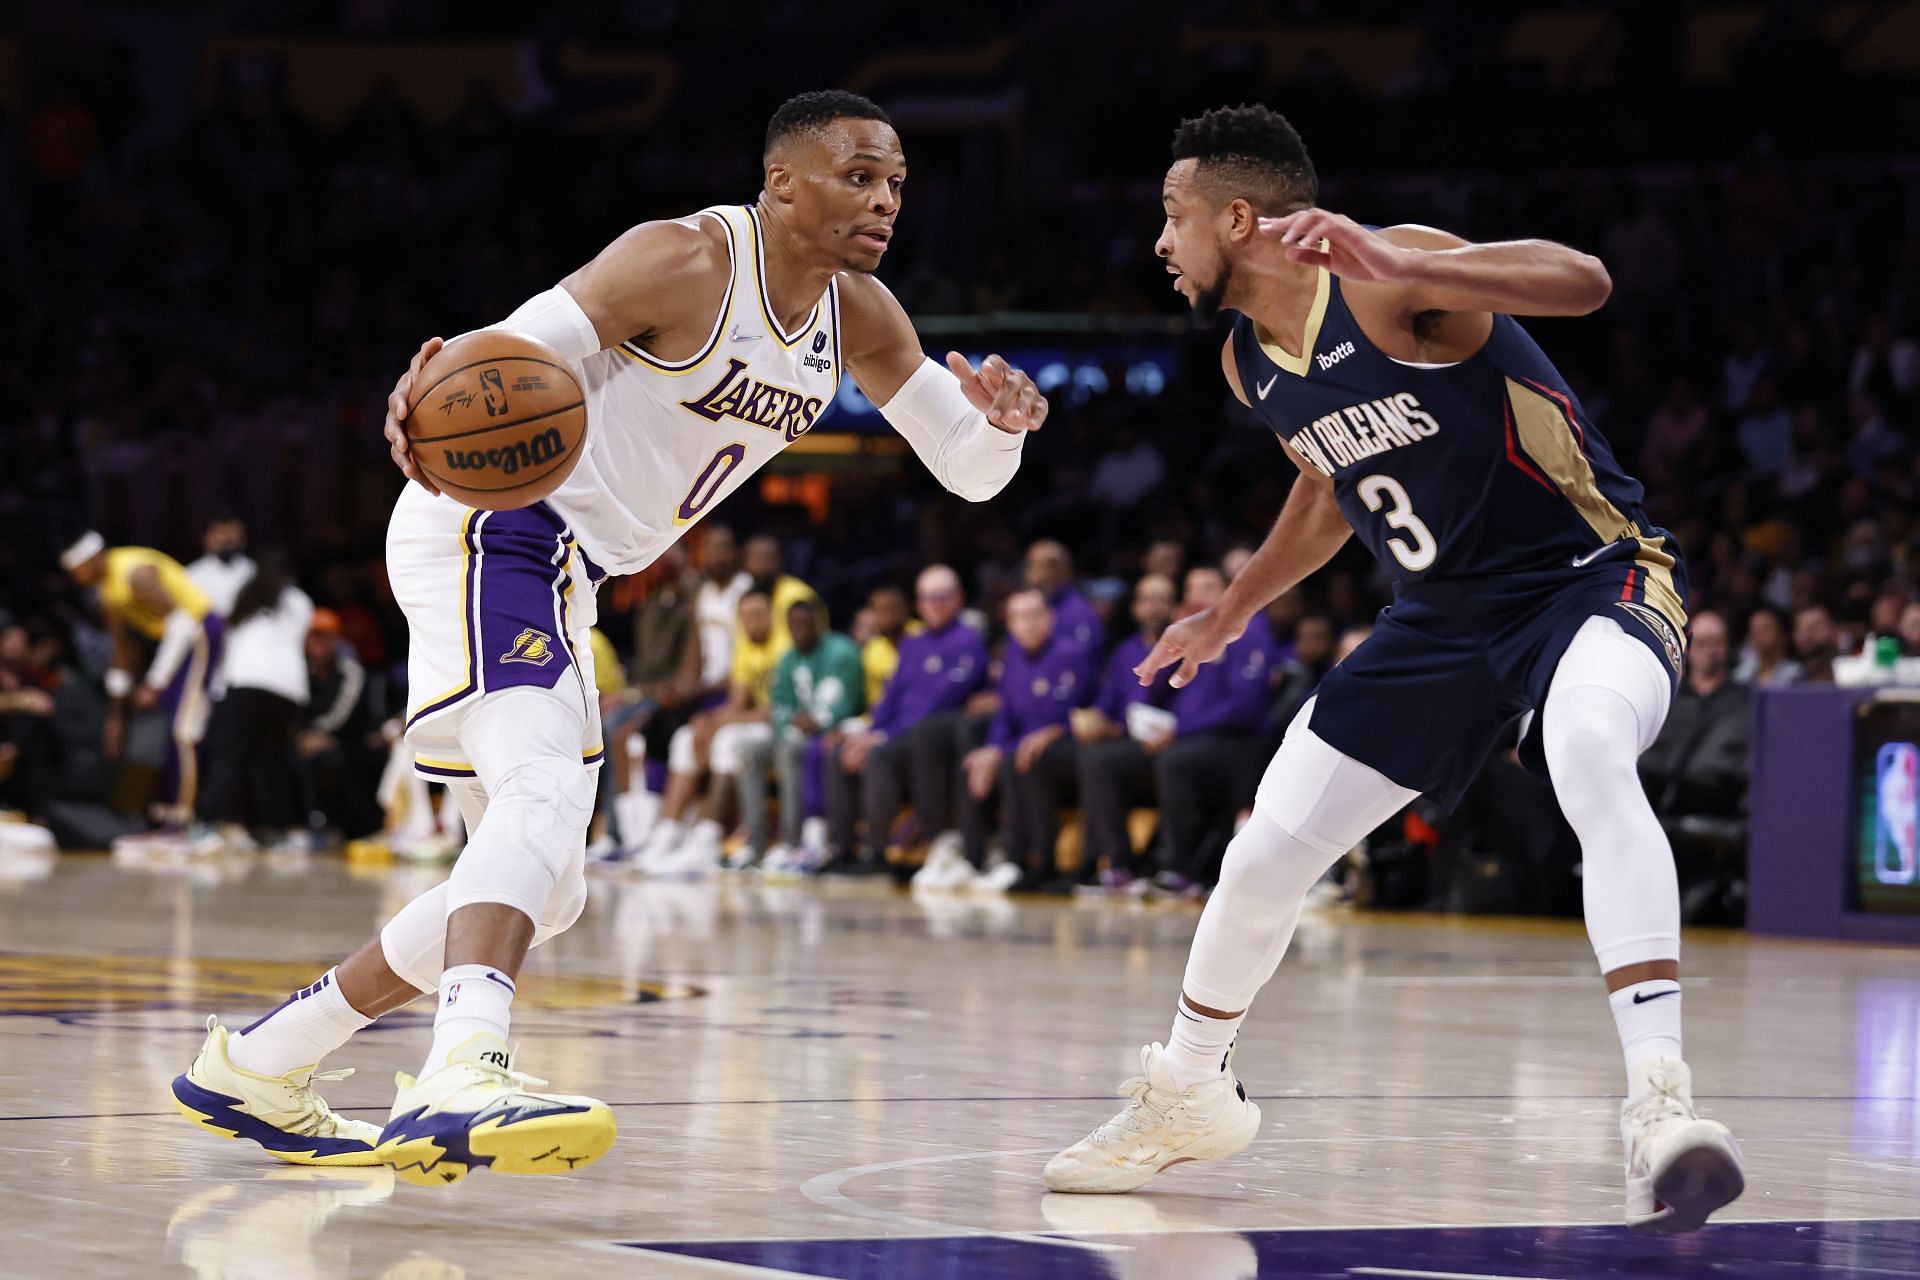 Russell Westbrook of the LA Lakers against CJ McCollum of the New Orleans Pelicans